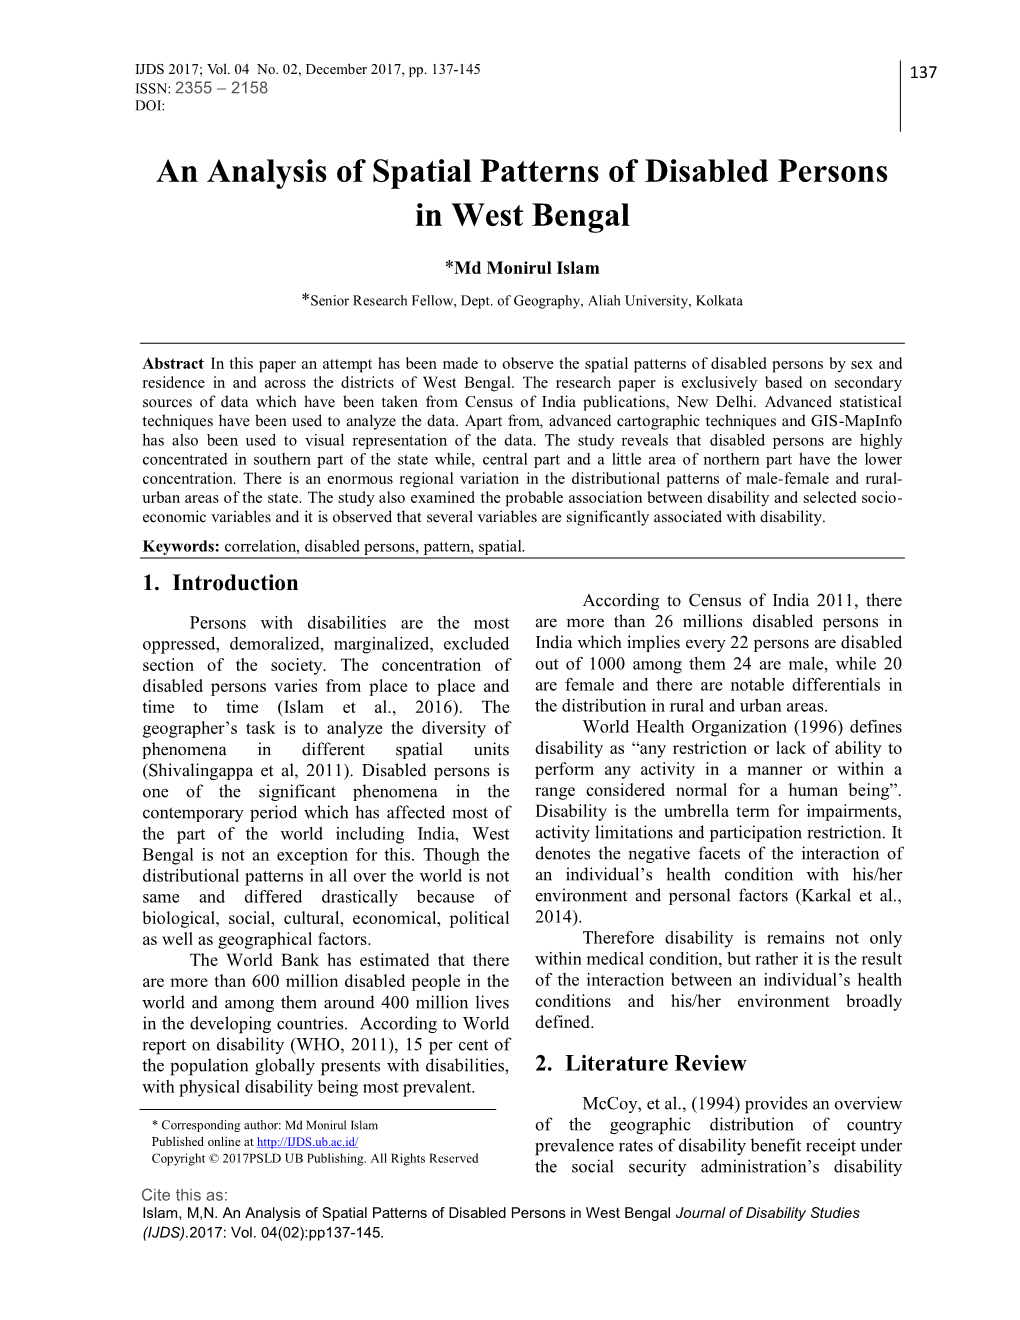 An Analysis of Spatial Patterns of Disabled Persons in West Bengal